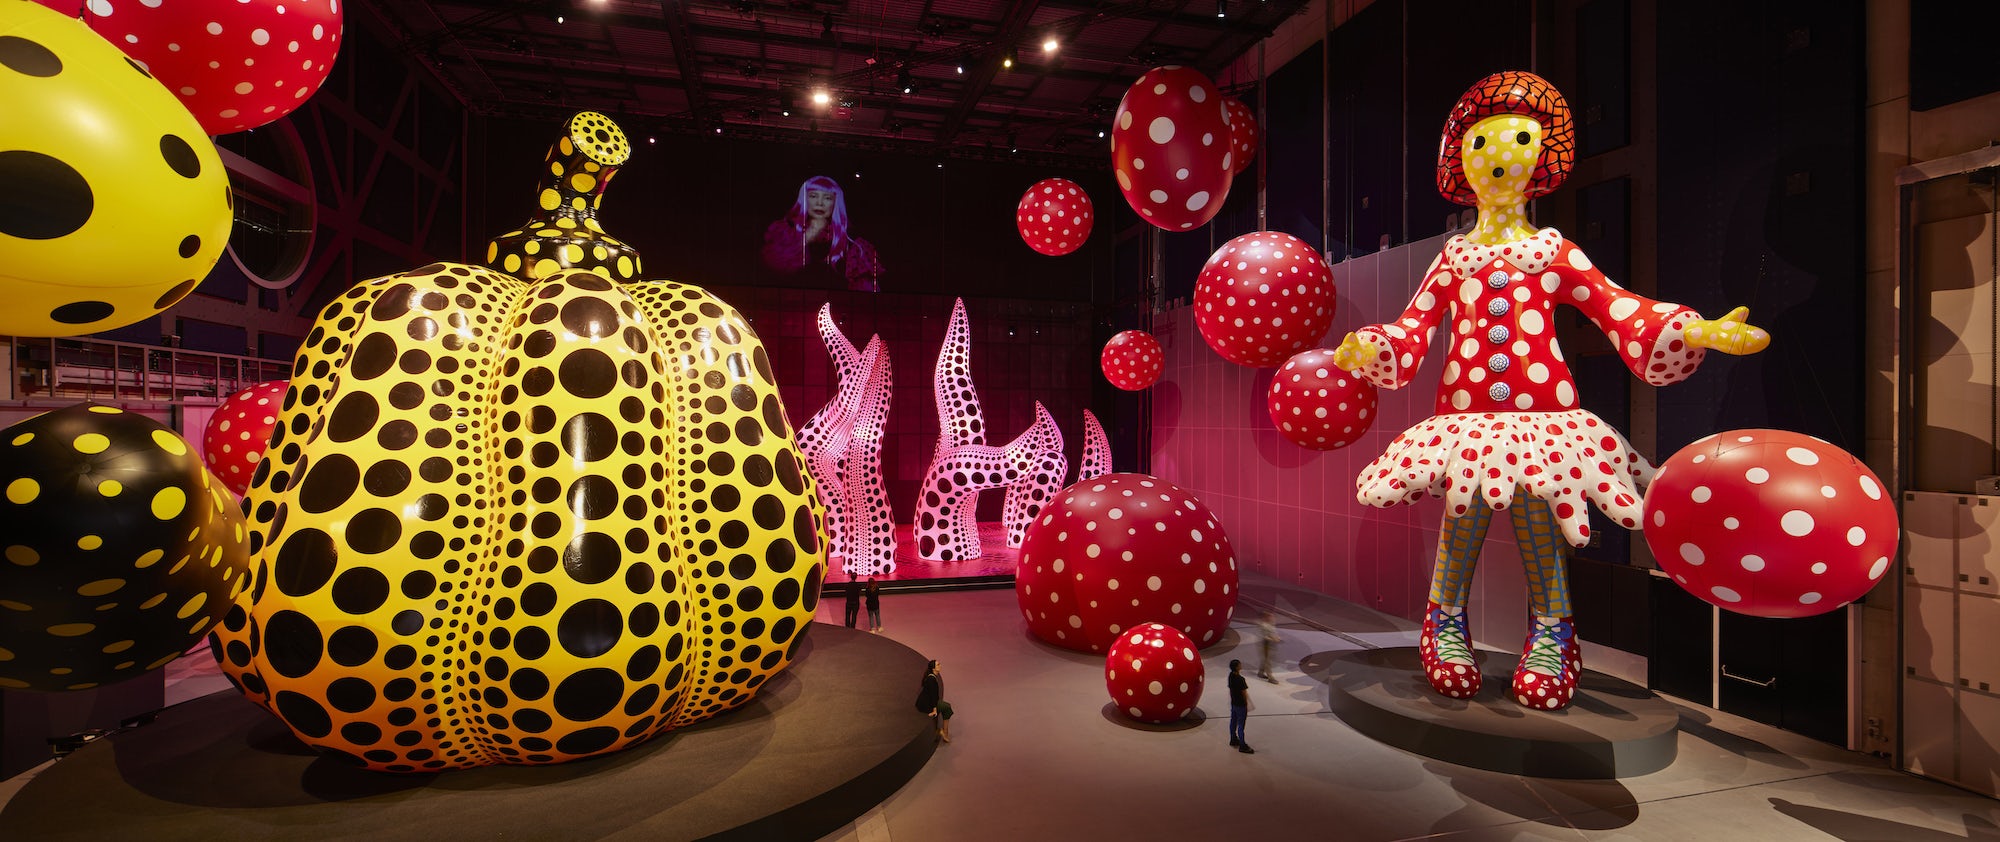 Installation view of Yayoi Kusama: You, Me and the Balloons at Aviva Studios